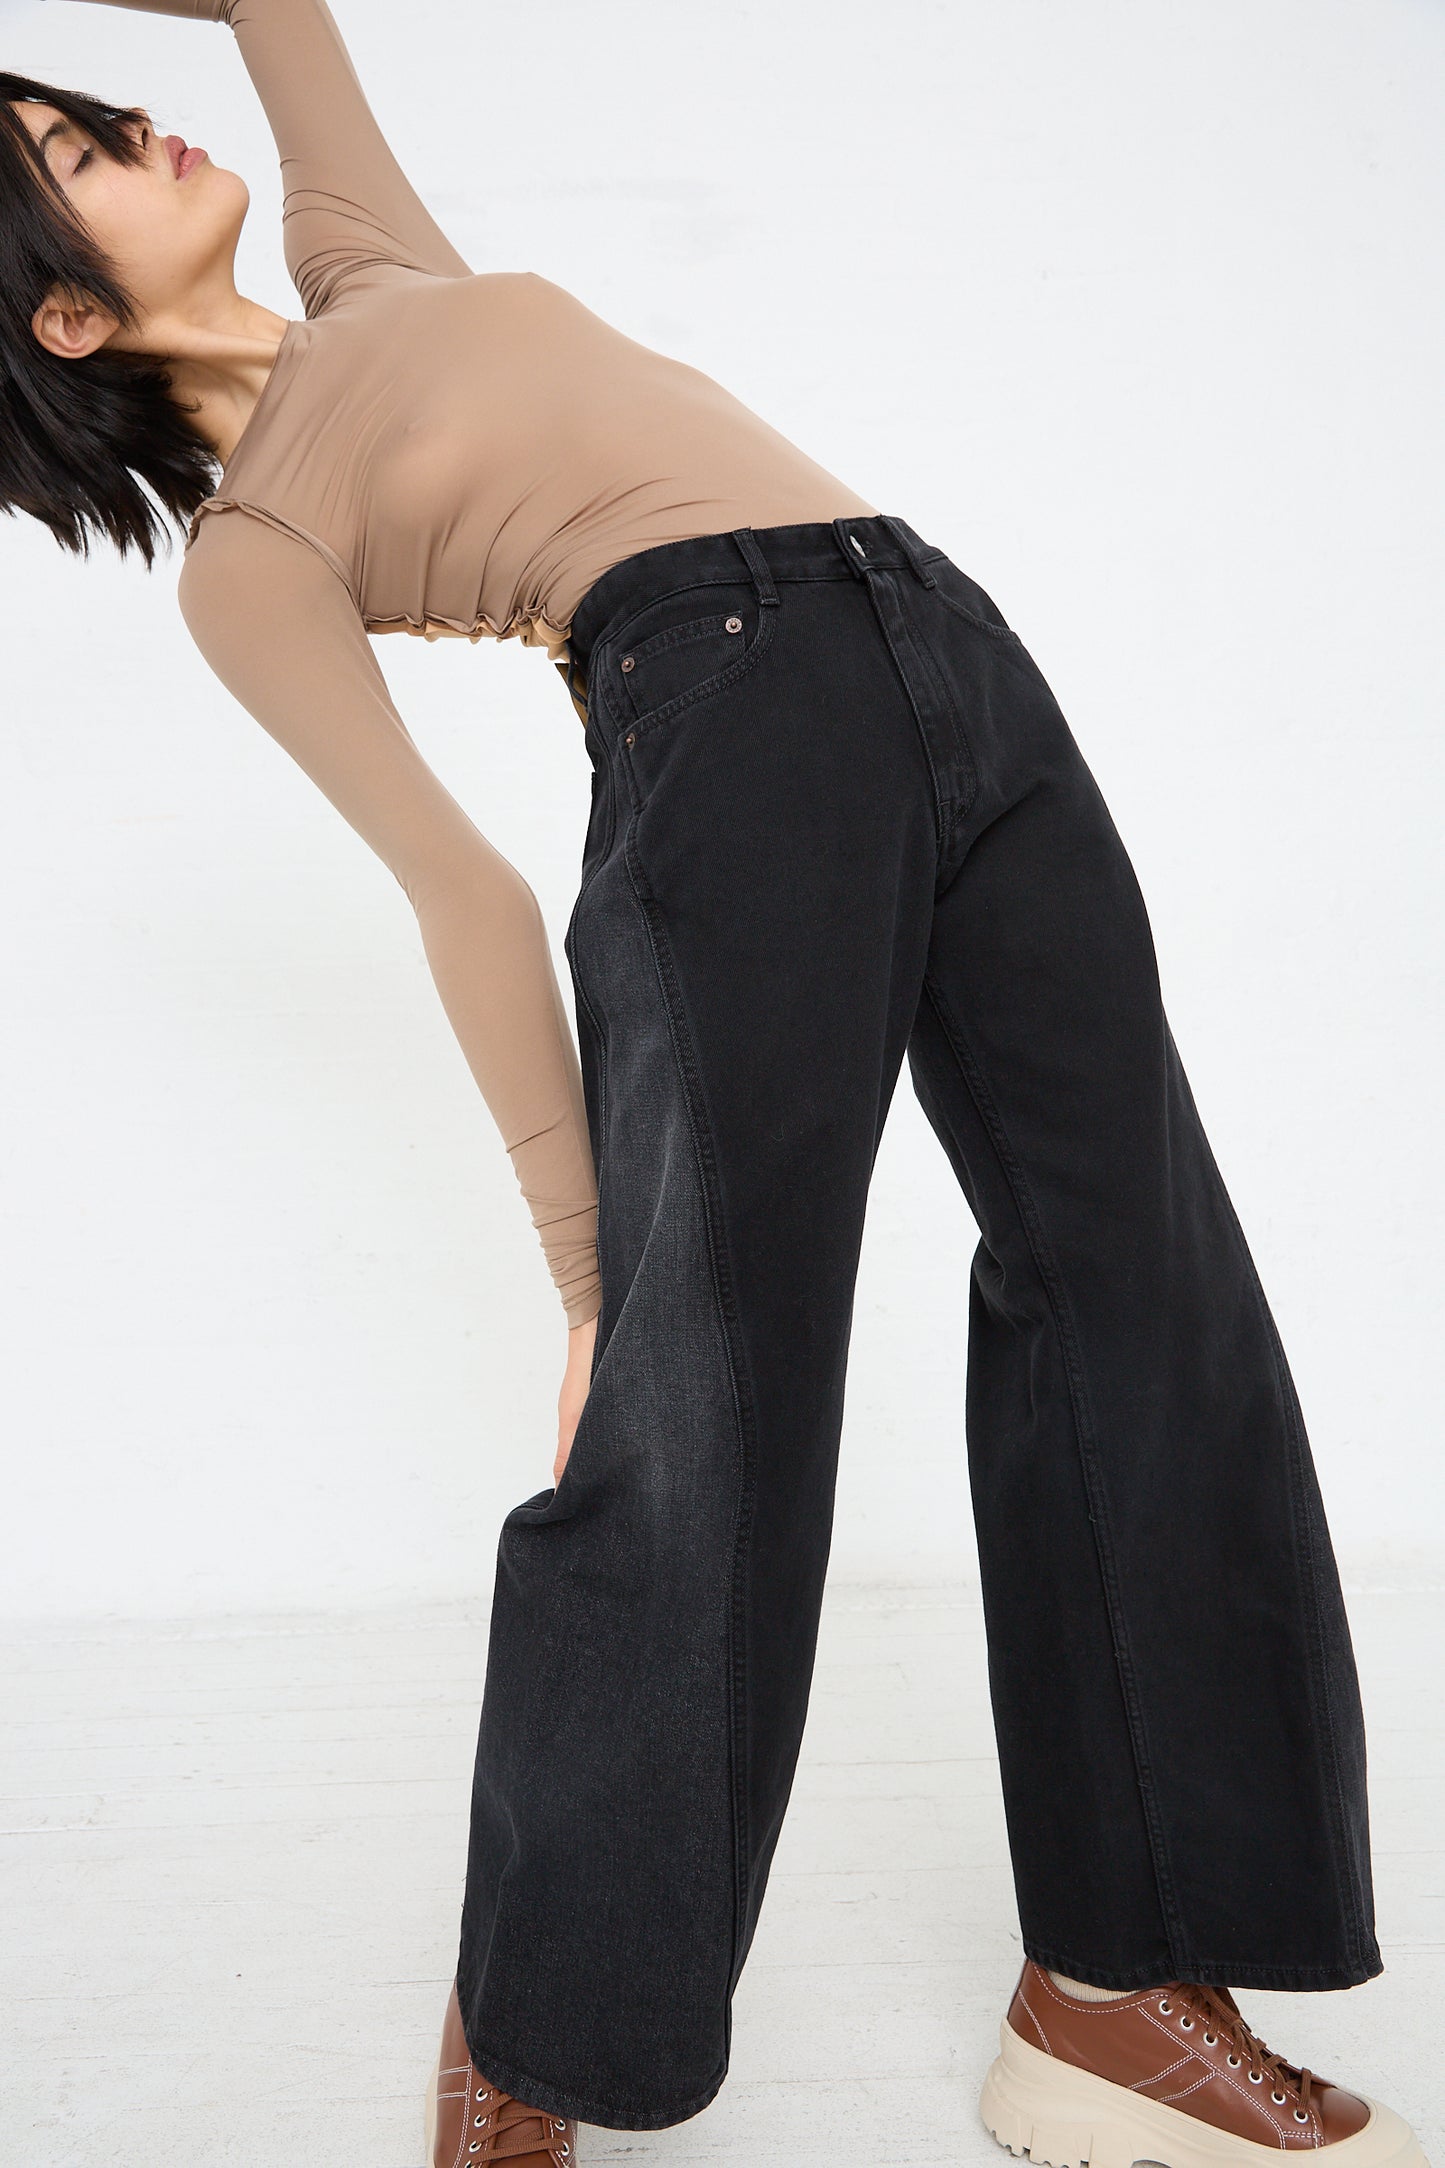 Woman in MM6 wide-leg black denim jeans and a beige top stretching to one side against a white background.